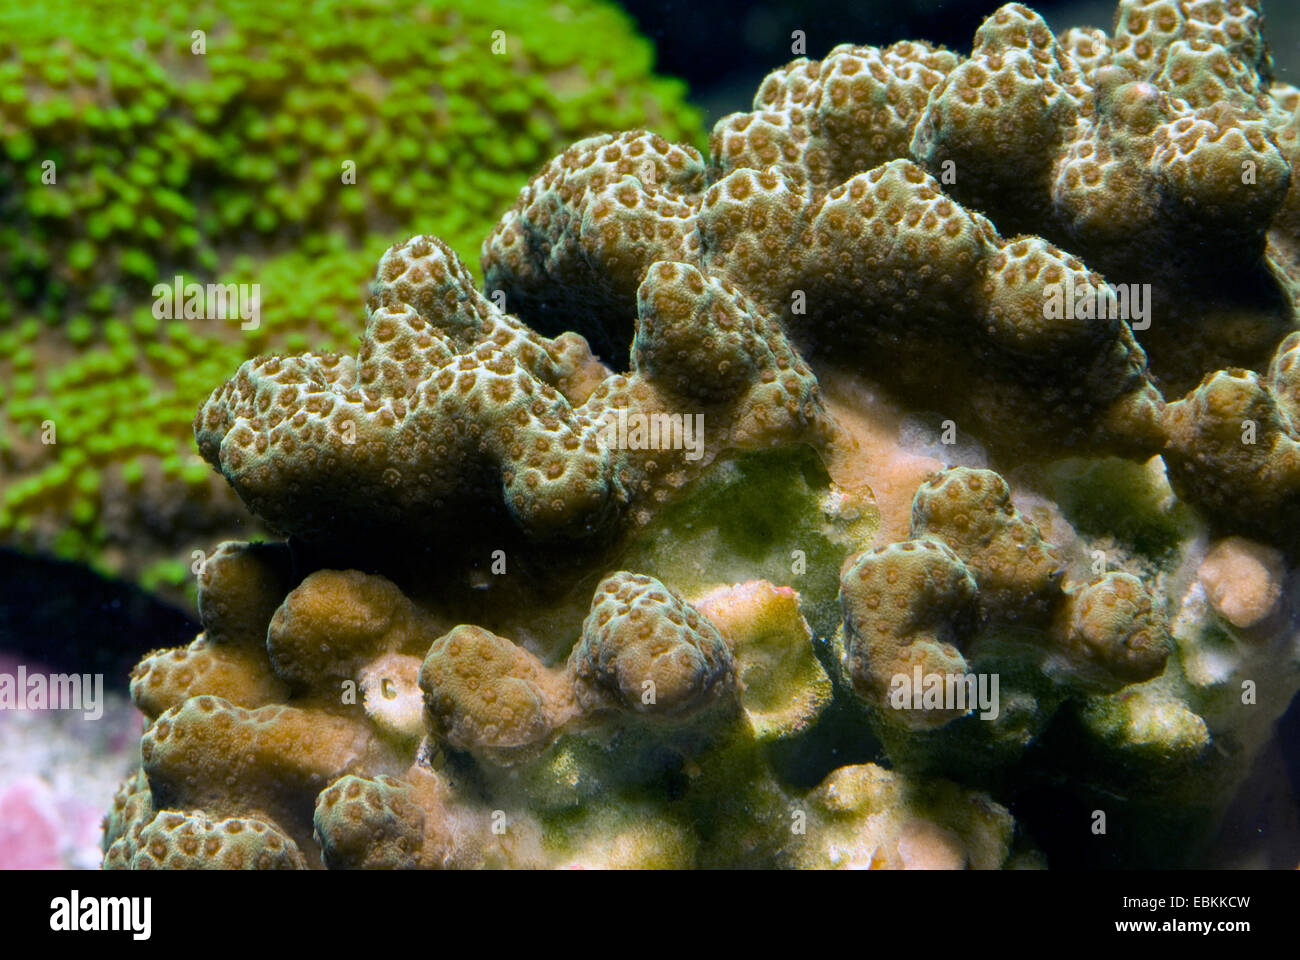 clubtip finger coral, clubbed finger coral, thick finger coral (Porites porites), close-up view Stock Photo